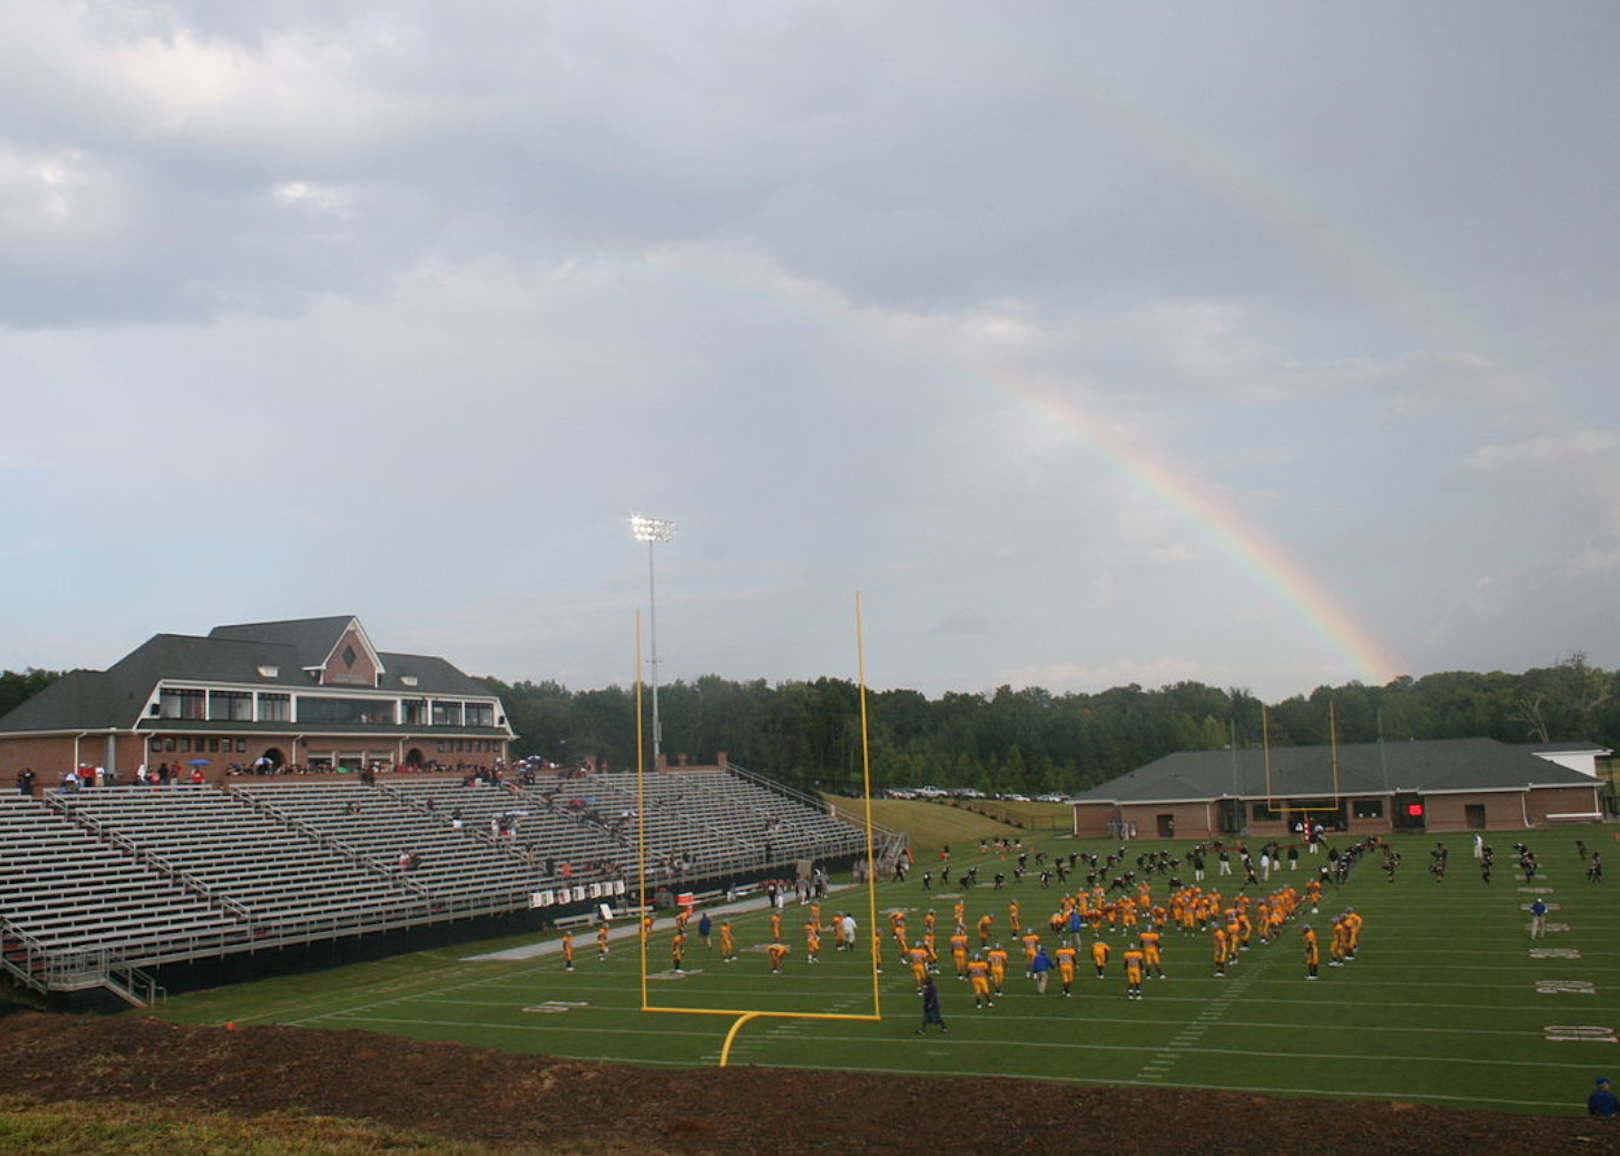 A football game with a rainbow in the background.